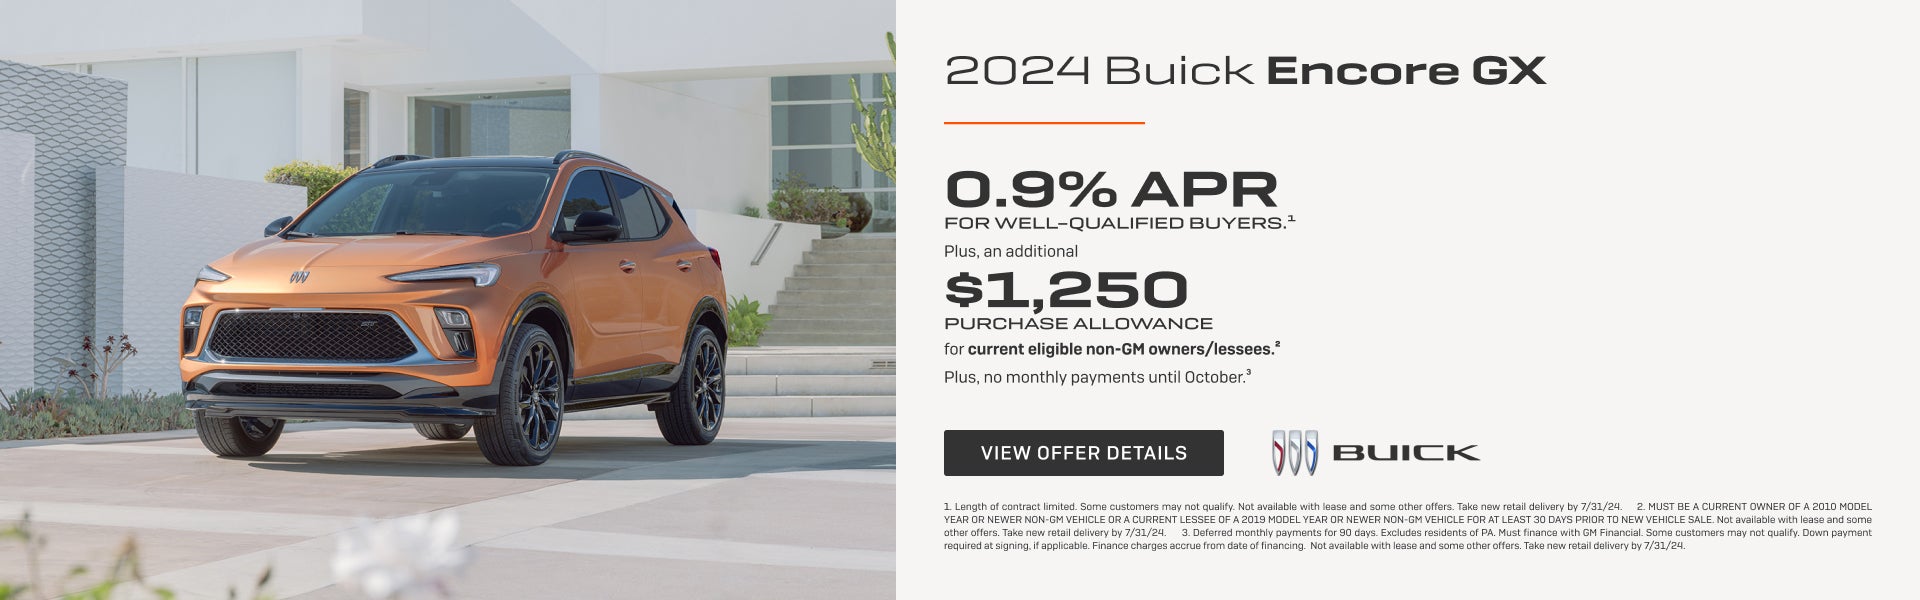 0.9% APR 
FOR WELL-QUALIFIED BUYERS.1

Plus, an additional $1,250 PURCHASE ALLOWANCE for current ...